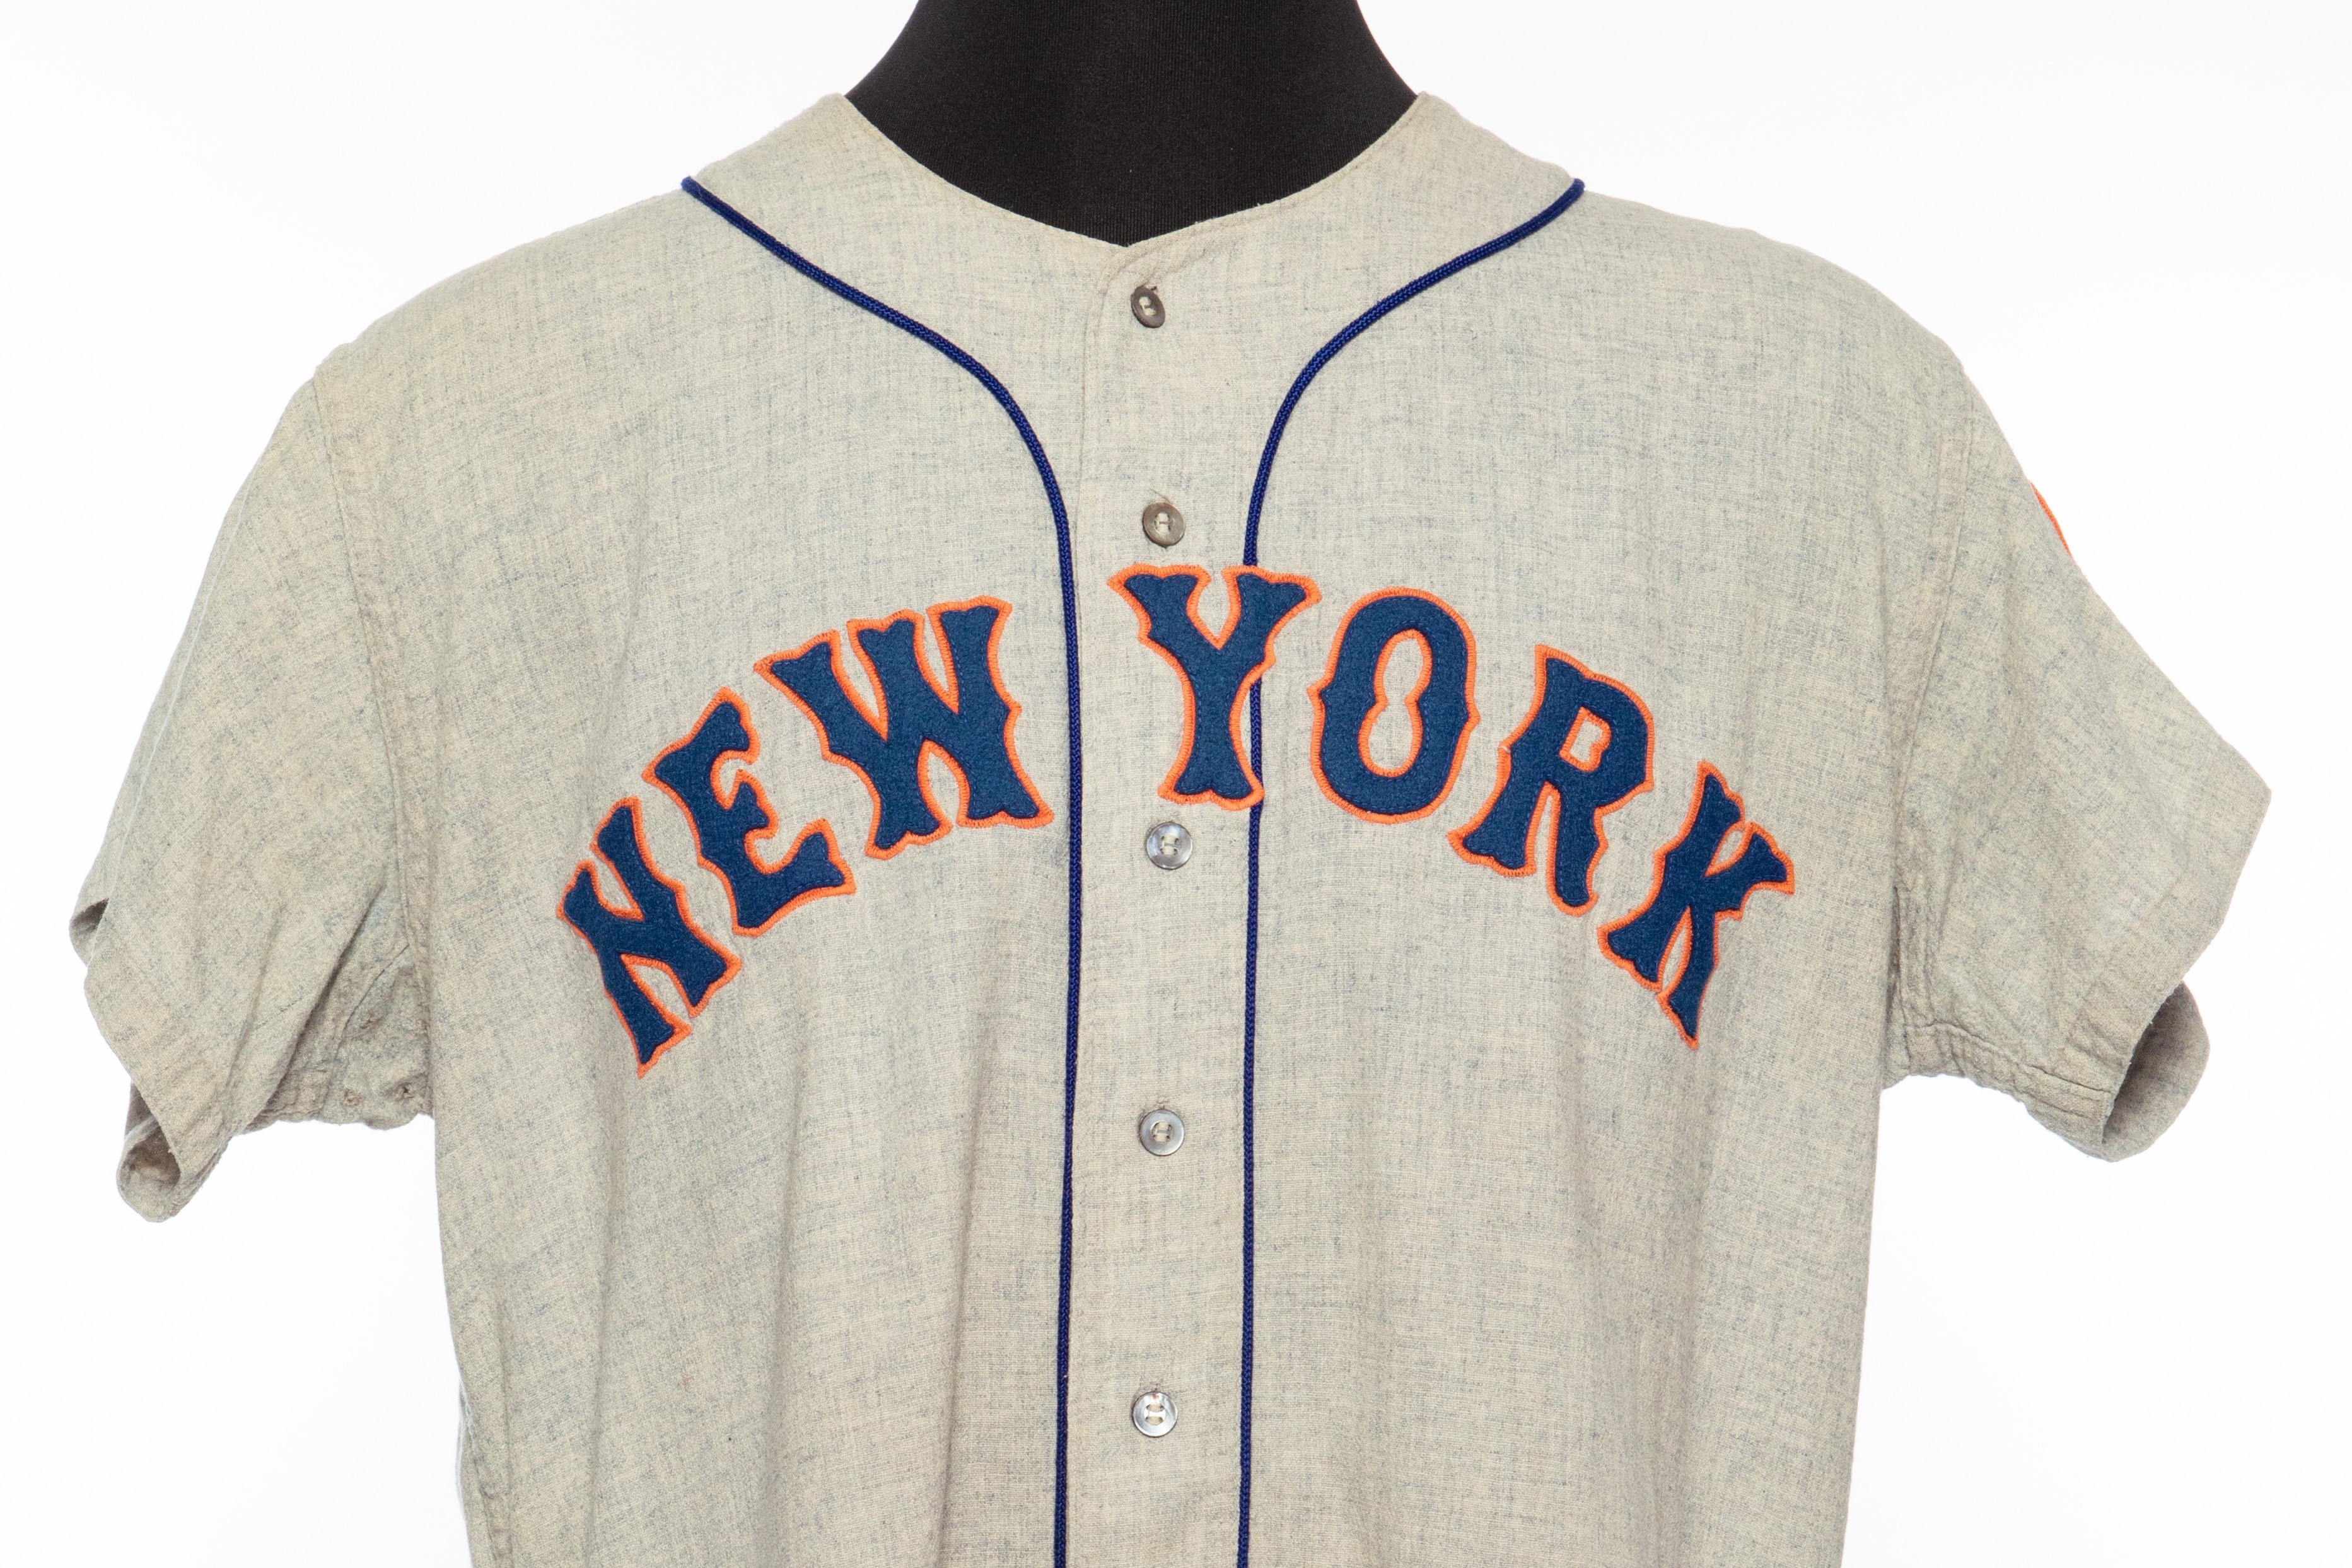 Cliff Floyd Autographed Road Jersey - Mets History